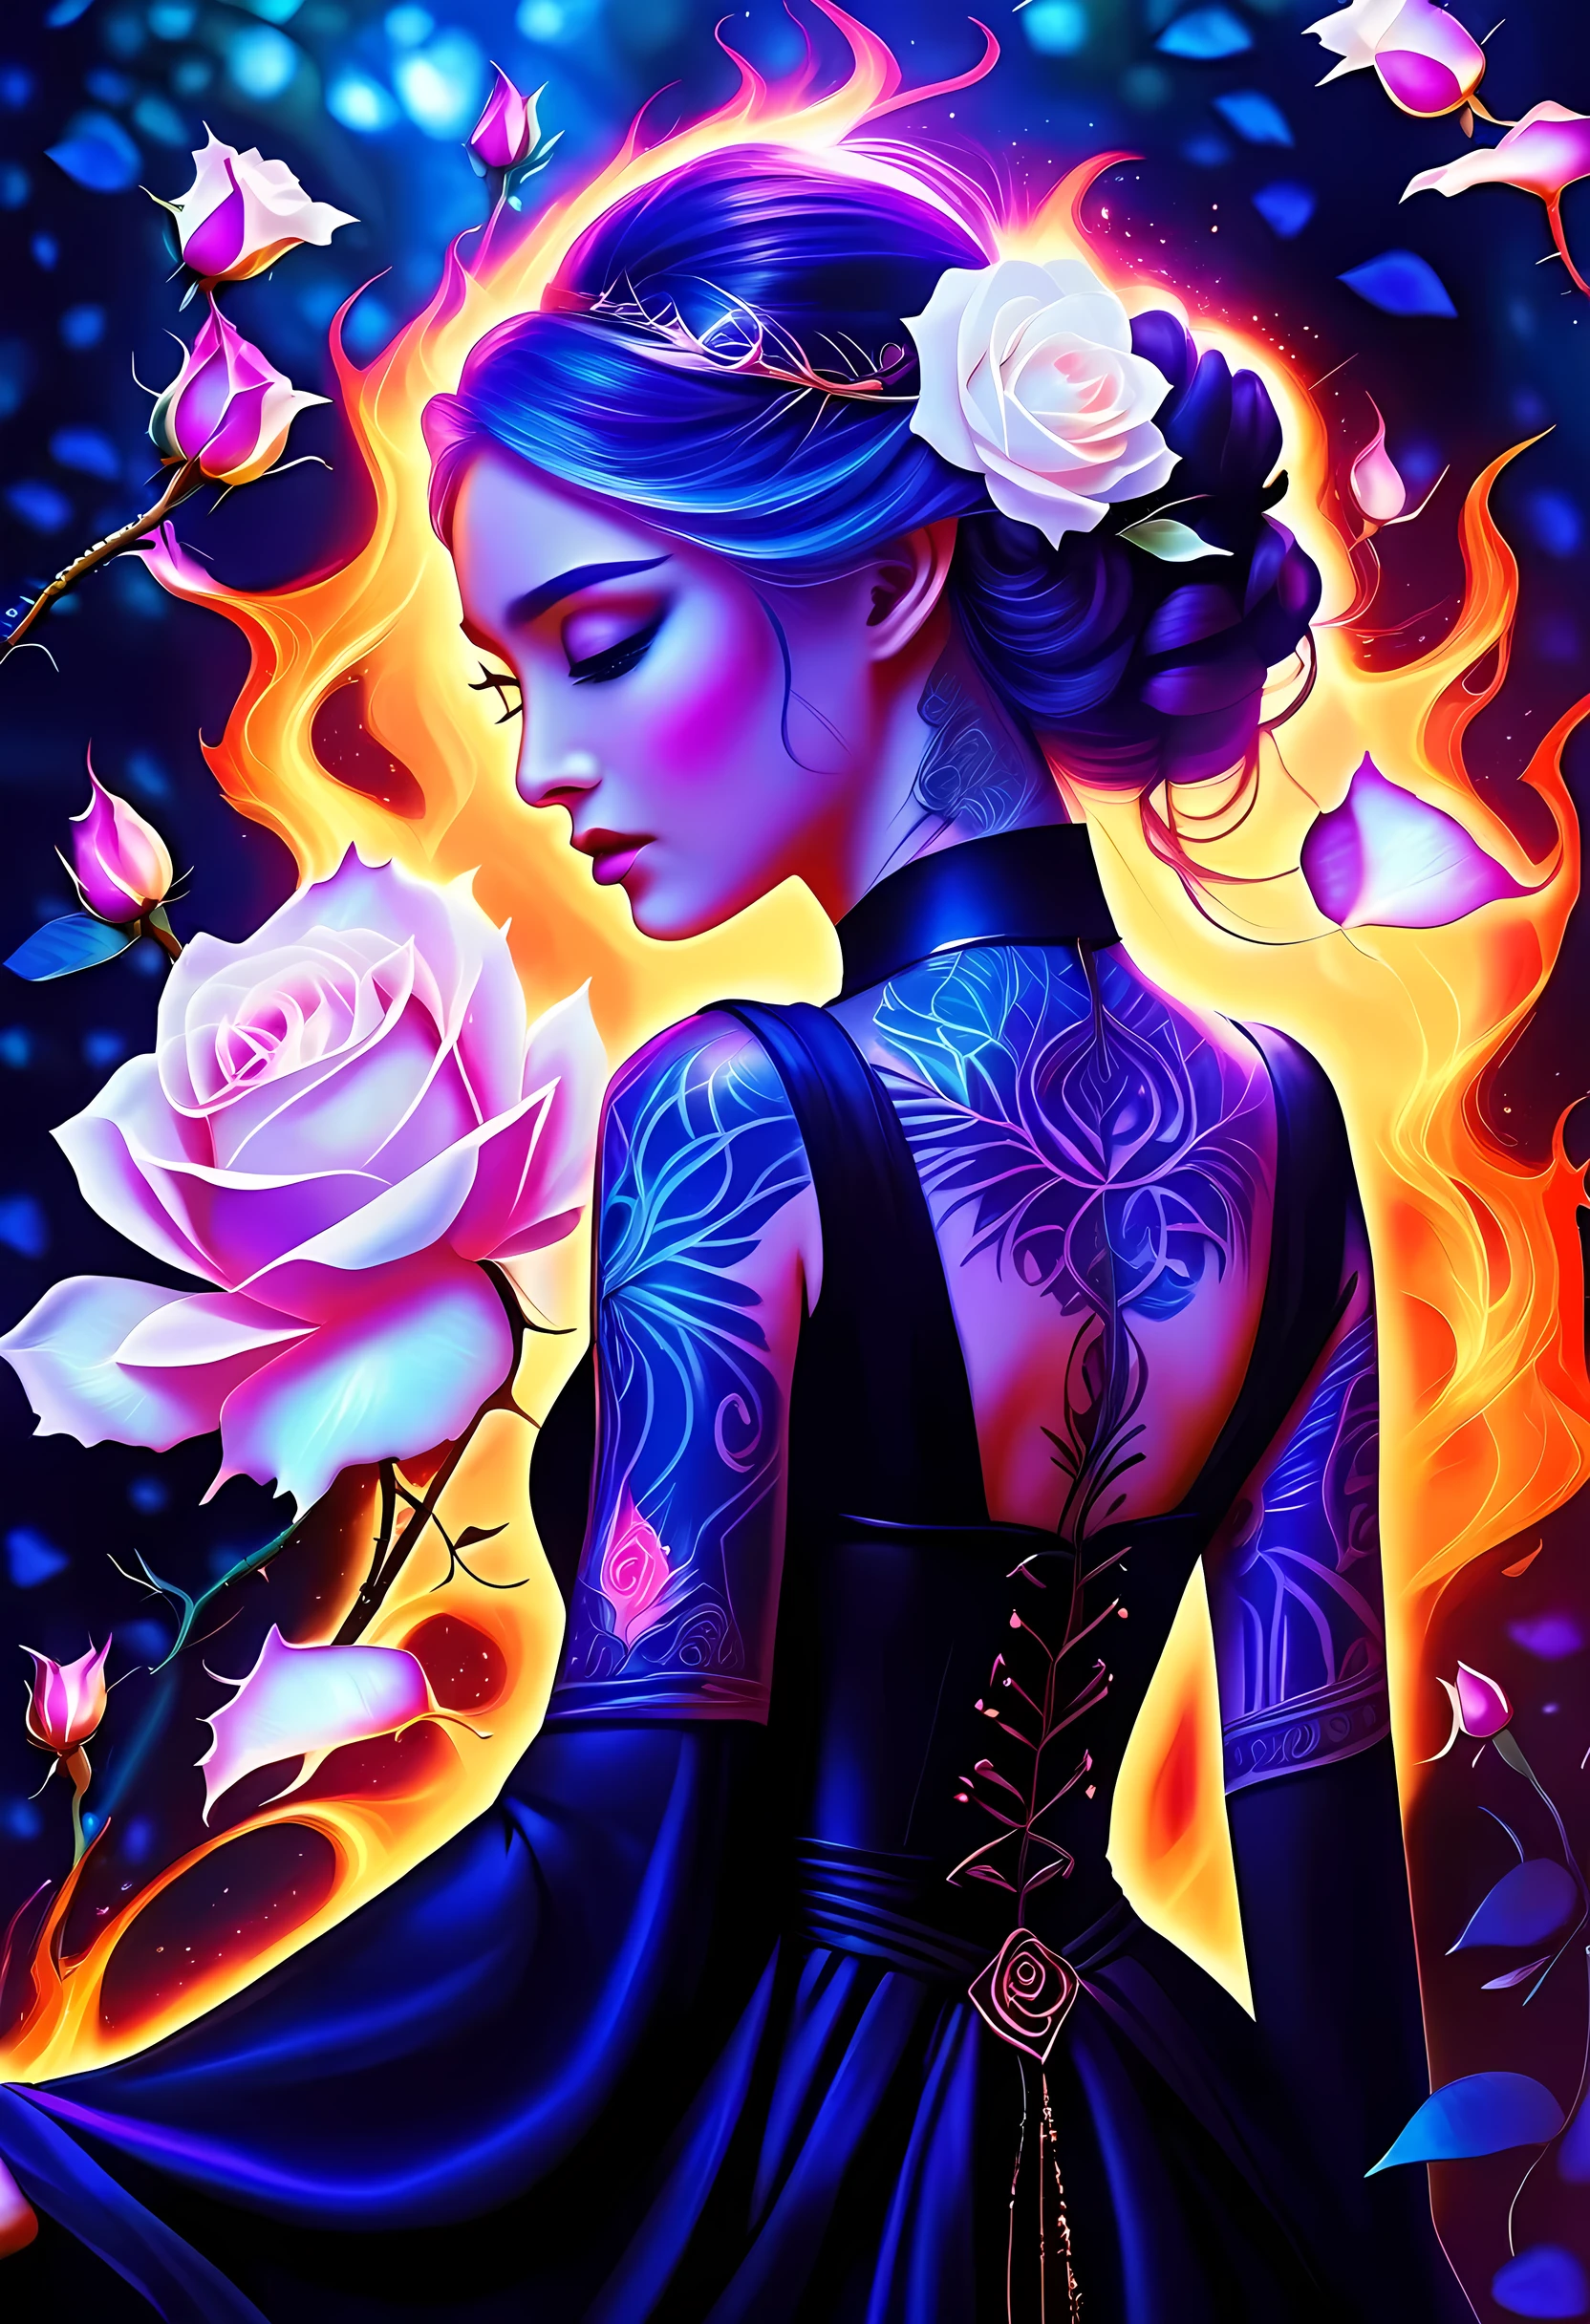 Arafed, Dark fantasy art, fantasy art, goth art, a picture of a tattoo on the back of a female elf,  of  glowing tattoo of a ((blue rose: 1.3)) the rose tattoo is vivid, intricate detailed coming to life rose from the ink to real life, AlchemyPunkAI, shoot taken from the back, ((the back is visible: 1.3), she wears a transparent  black dress, the dress is elegant, flowing, elven style, that the tattoos glow, dynamic hair color, dynamic hair style, crystalline dress